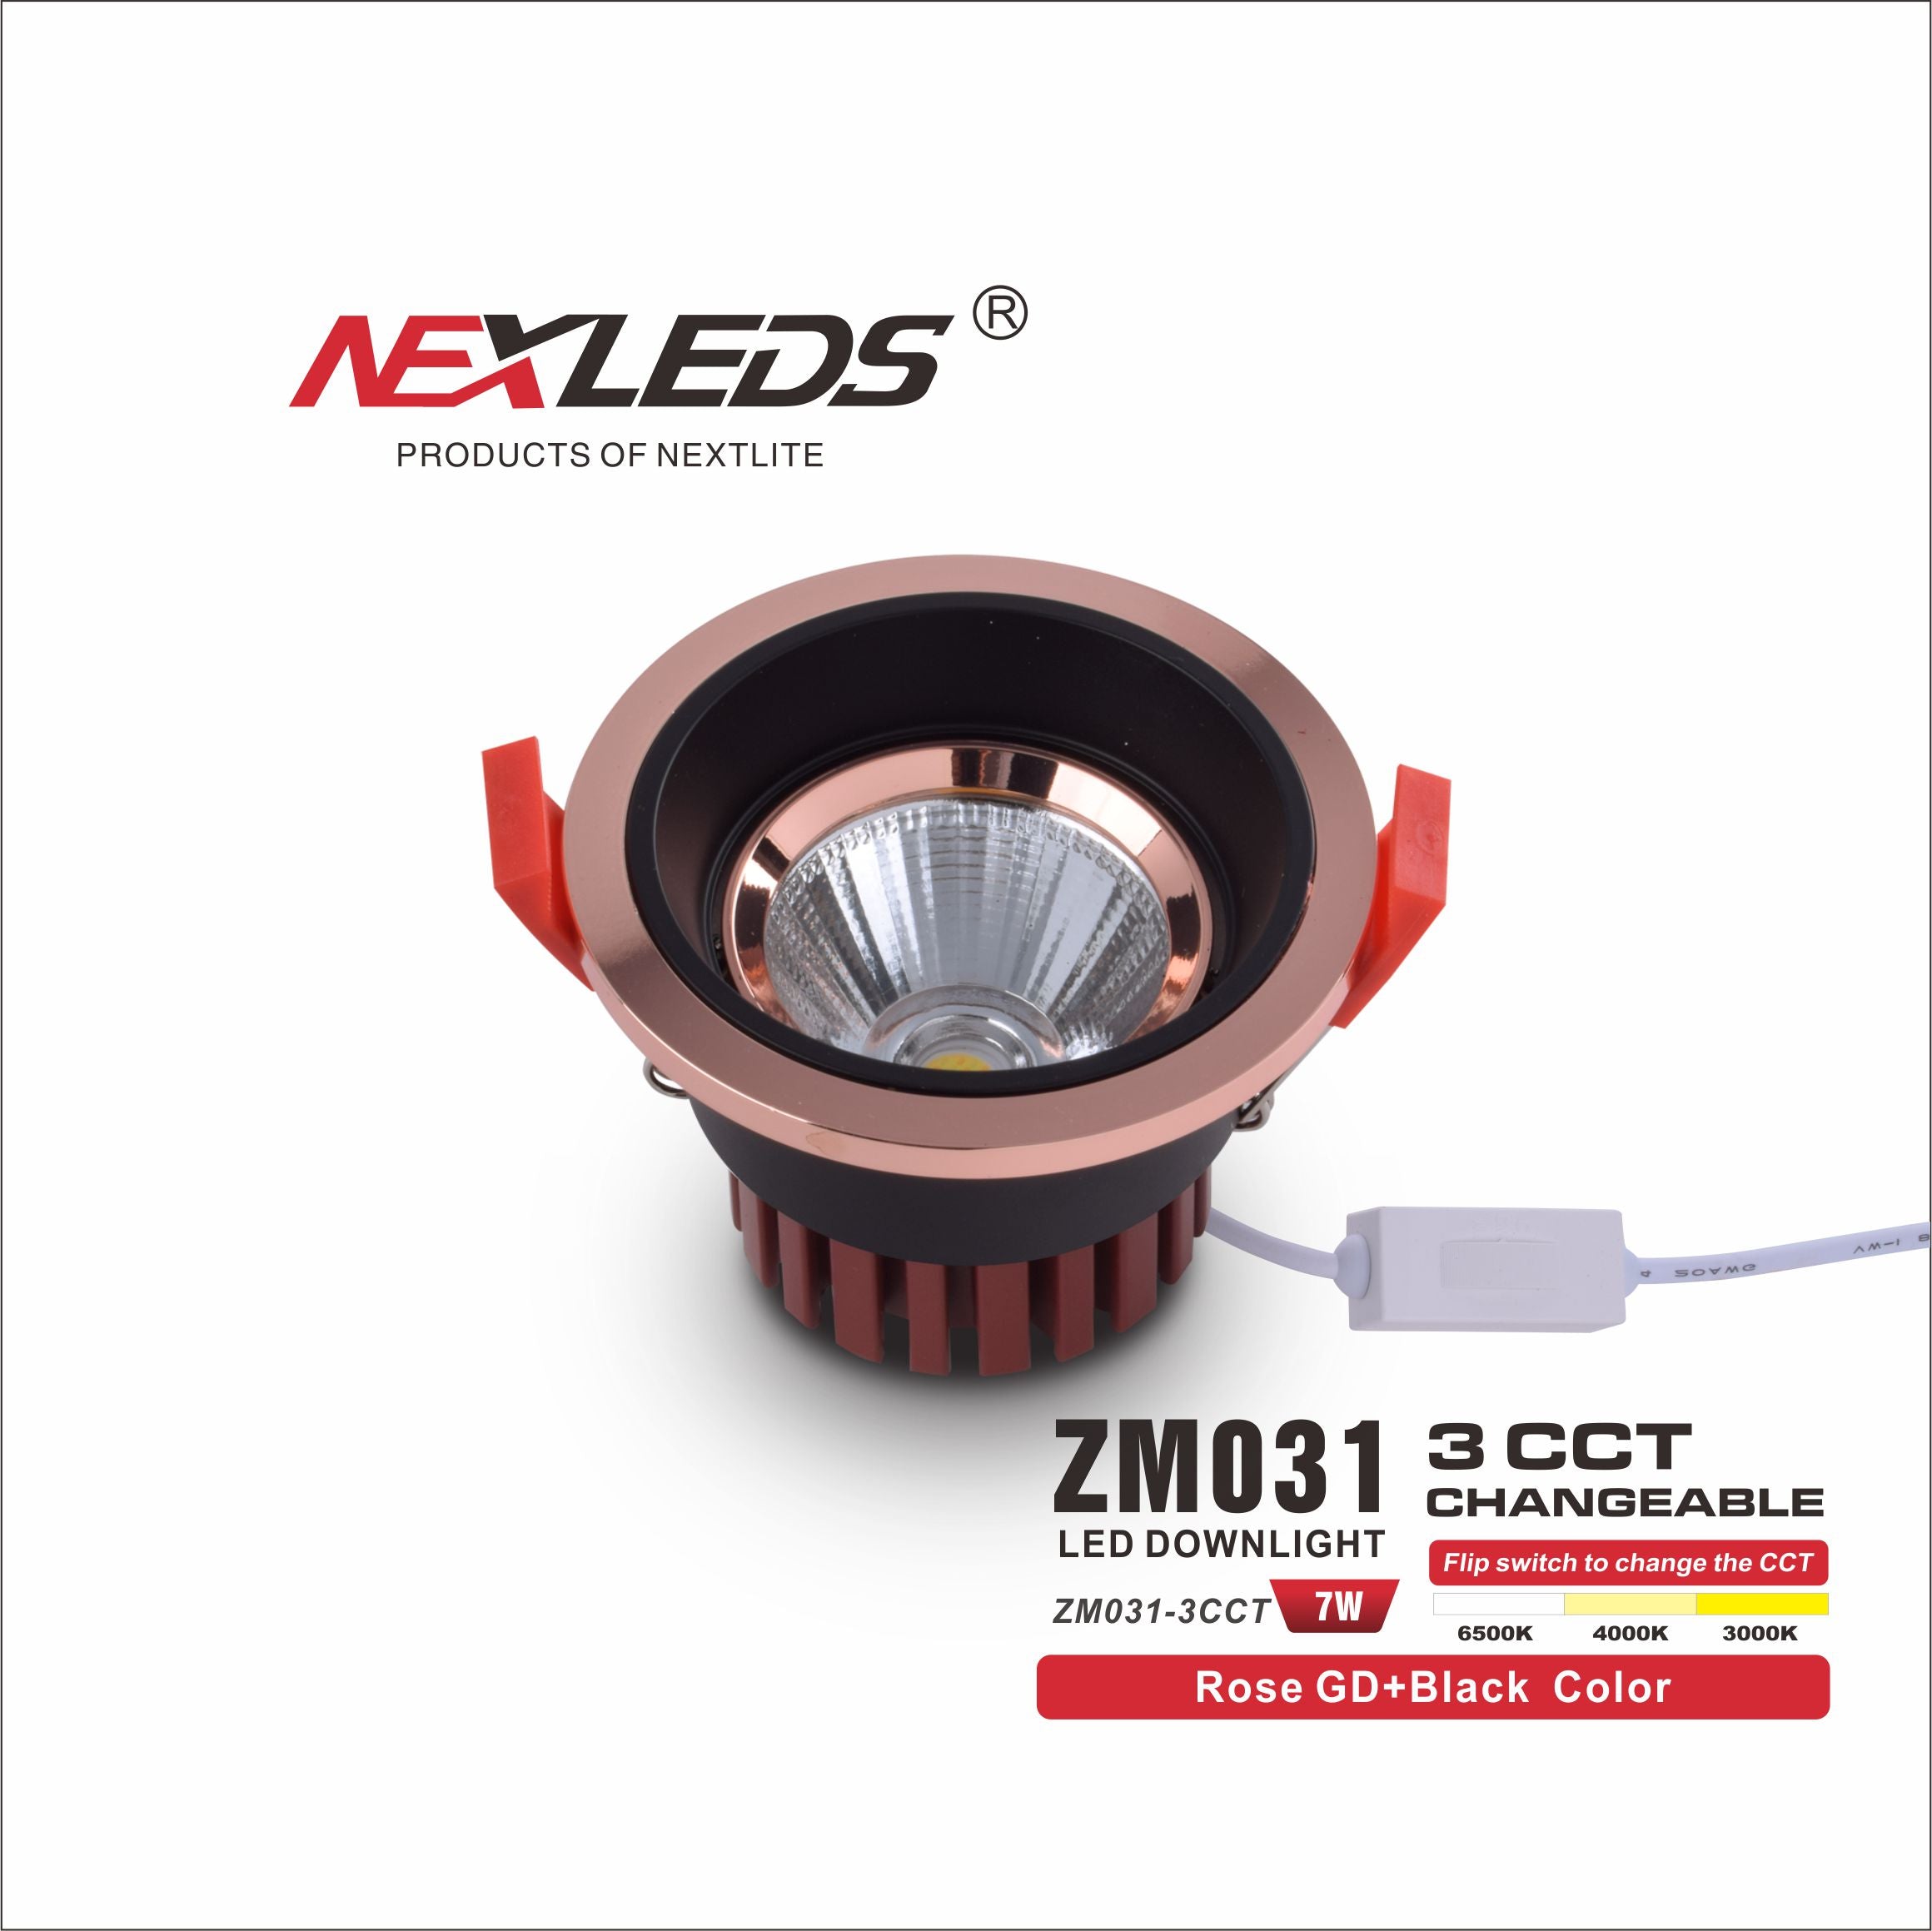 ZM031-3CCT 7W CHANGEABLE LED Downlight